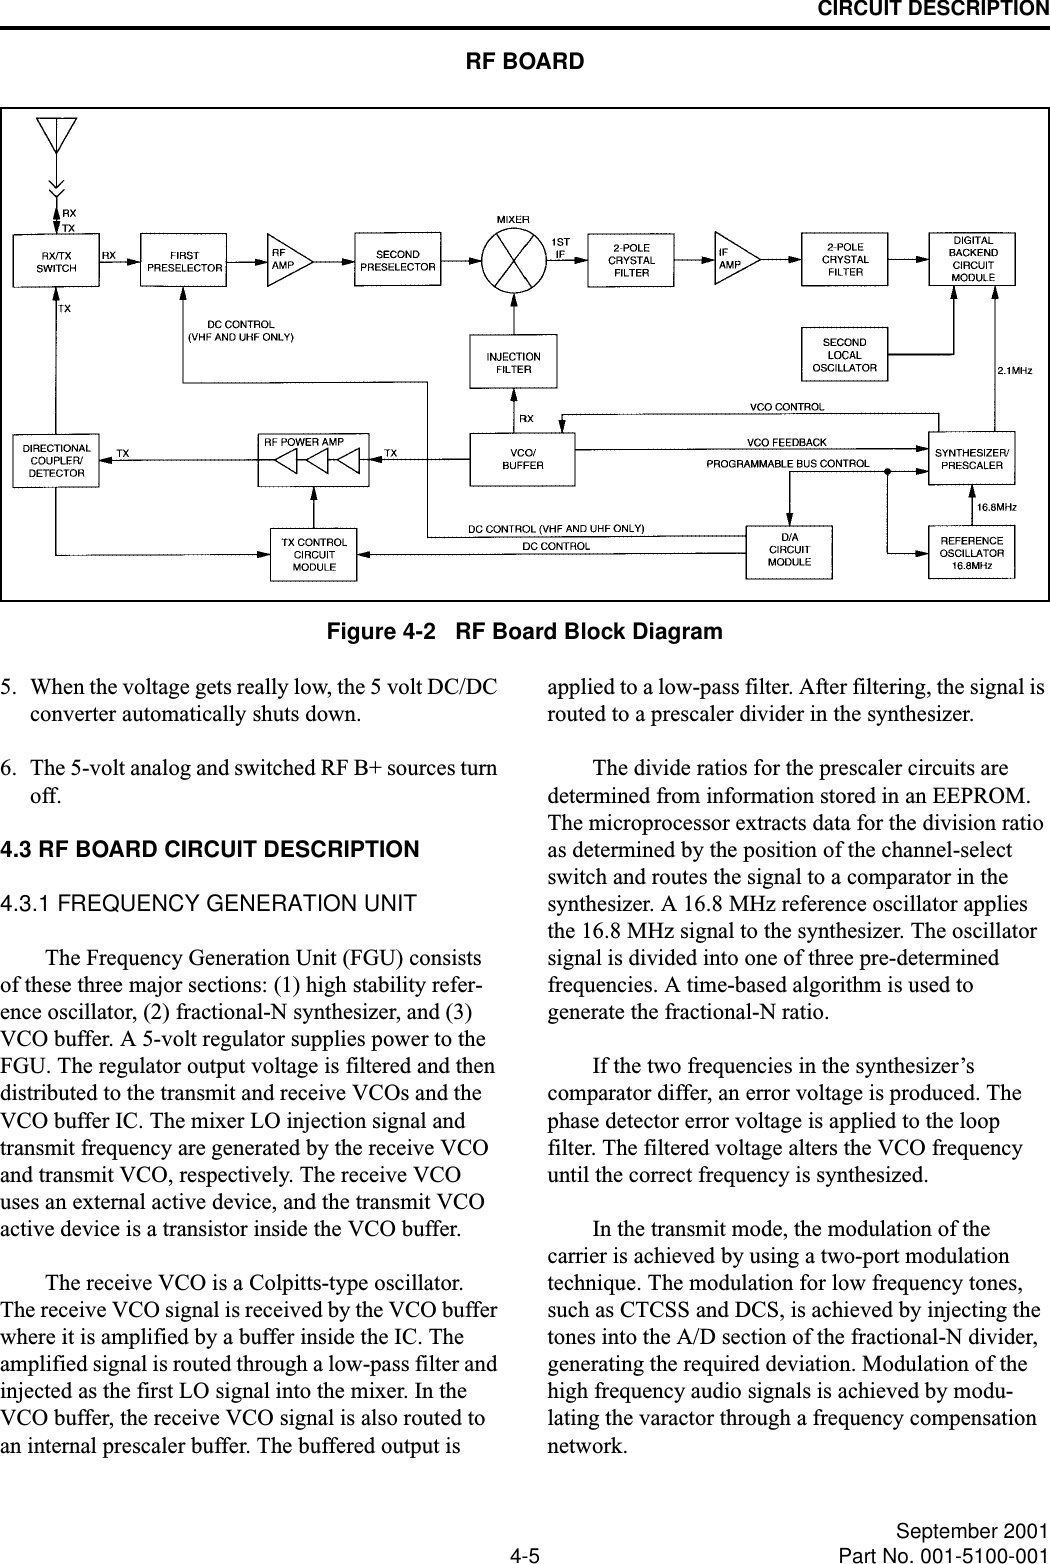 CIRCUIT DESCRIPTION4-5 September 2001Part No. 001-5100-001Figure 4-2   RF Board Block Diagram5. When the voltage gets really low, the 5 volt DC/DC converter automatically shuts down.6. The 5-volt analog and switched RF B+ sources turn off.4.3 RF BOARD CIRCUIT DESCRIPTION4.3.1 FREQUENCY GENERATION UNITThe Frequency Generation Unit (FGU) consists of these three major sections: (1) high stability refer-ence oscillator, (2) fractional-N synthesizer, and (3) VCO buffer. A 5-volt regulator supplies power to the FGU. The regulator output voltage is filtered and then distributed to the transmit and receive VCOs and the VCO buffer IC. The mixer LO injection signal and transmit frequency are generated by the receive VCO and transmit VCO, respectively. The receive VCO uses an external active device, and the transmit VCO active device is a transistor inside the VCO buffer. The receive VCO is a Colpitts-type oscillator. The receive VCO signal is received by the VCO buffer where it is amplified by a buffer inside the IC. The amplified signal is routed through a low-pass filter and injected as the first LO signal into the mixer. In the VCO buffer, the receive VCO signal is also routed to an internal prescaler buffer. The buffered output is applied to a low-pass filter. After filtering, the signal is routed to a prescaler divider in the synthesizer.The divide ratios for the prescaler circuits are determined from information stored in an EEPROM. The microprocessor extracts data for the division ratio as determined by the position of the channel-select switch and routes the signal to a comparator in the synthesizer. A 16.8 MHz reference oscillator applies the 16.8 MHz signal to the synthesizer. The oscillator signal is divided into one of three pre-determined frequencies. A time-based algorithm is used to generate the fractional-N ratio.If the two frequencies in the synthesizer’s comparator differ, an error voltage is produced. The phase detector error voltage is applied to the loop filter. The filtered voltage alters the VCO frequency until the correct frequency is synthesized.In the transmit mode, the modulation of the carrier is achieved by using a two-port modulation technique. The modulation for low frequency tones, such as CTCSS and DCS, is achieved by injecting the tones into the A/D section of the fractional-N divider, generating the required deviation. Modulation of the high frequency audio signals is achieved by modu-lating the varactor through a frequency compensation network.RF BOARD